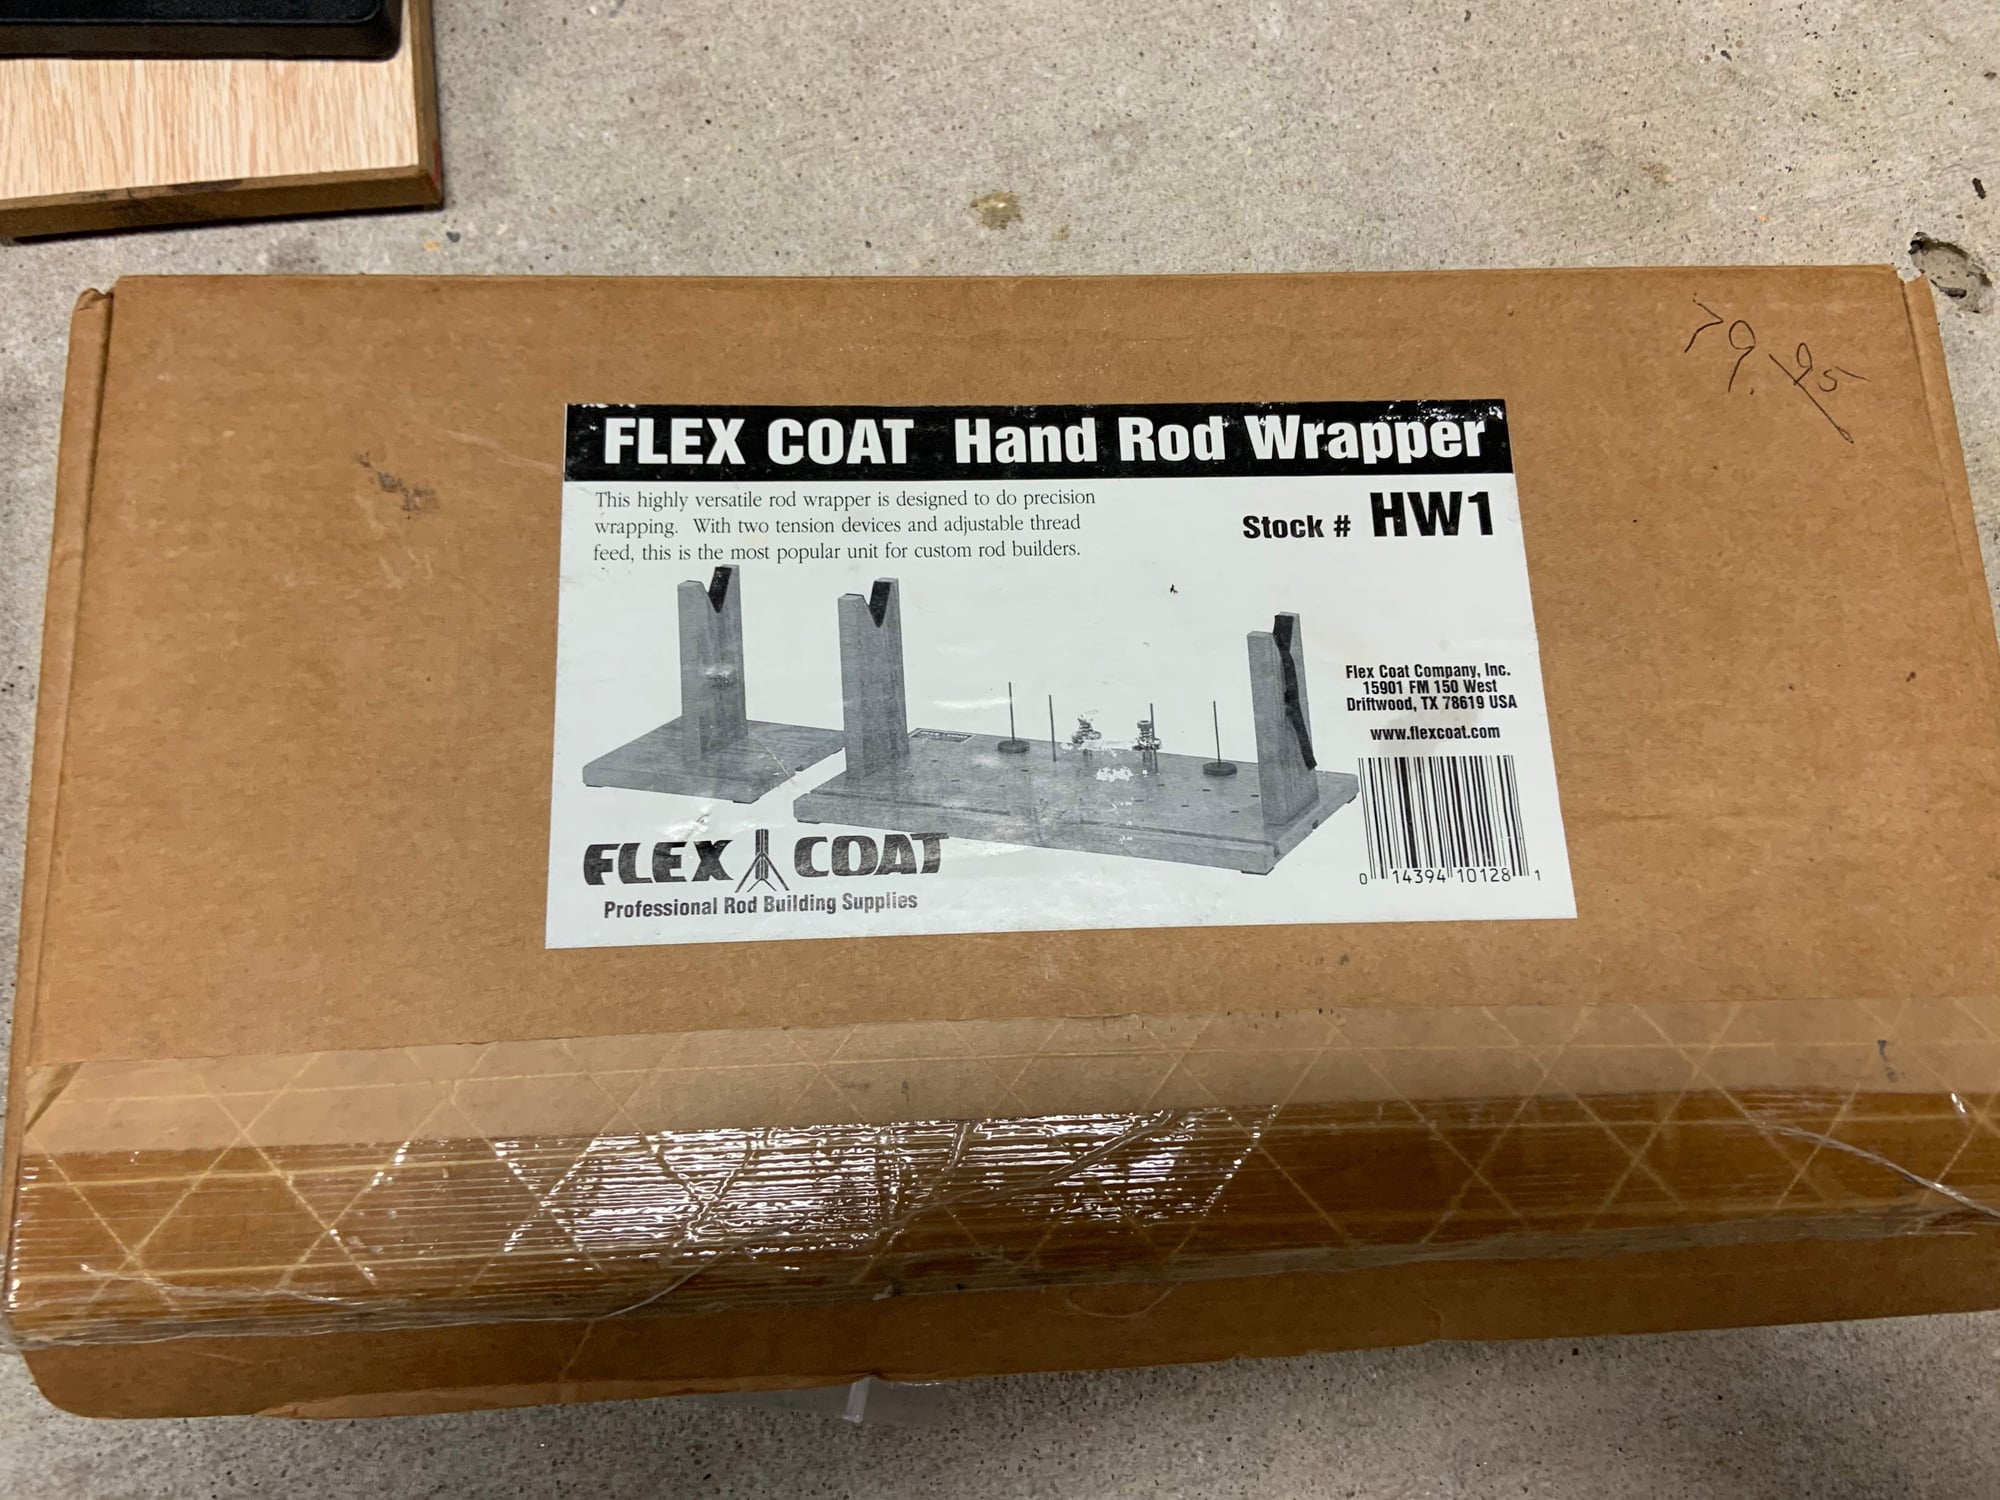 Rod Building Equipment - Flexcoat HW1, Dryer and DVD - The Hull